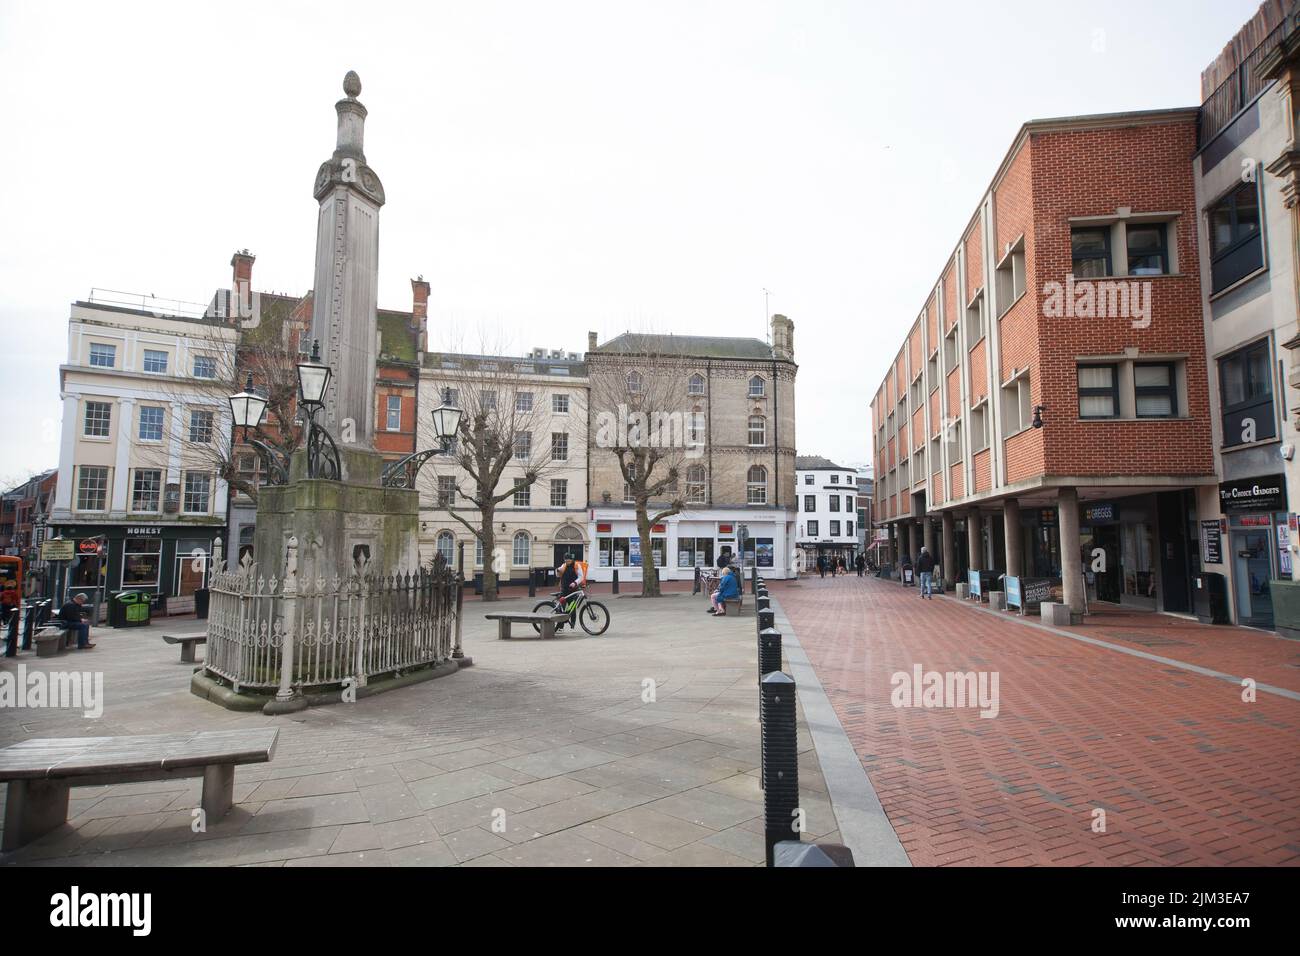 Views of Market Place in Reading, Berkshire in the UK Stock Photo